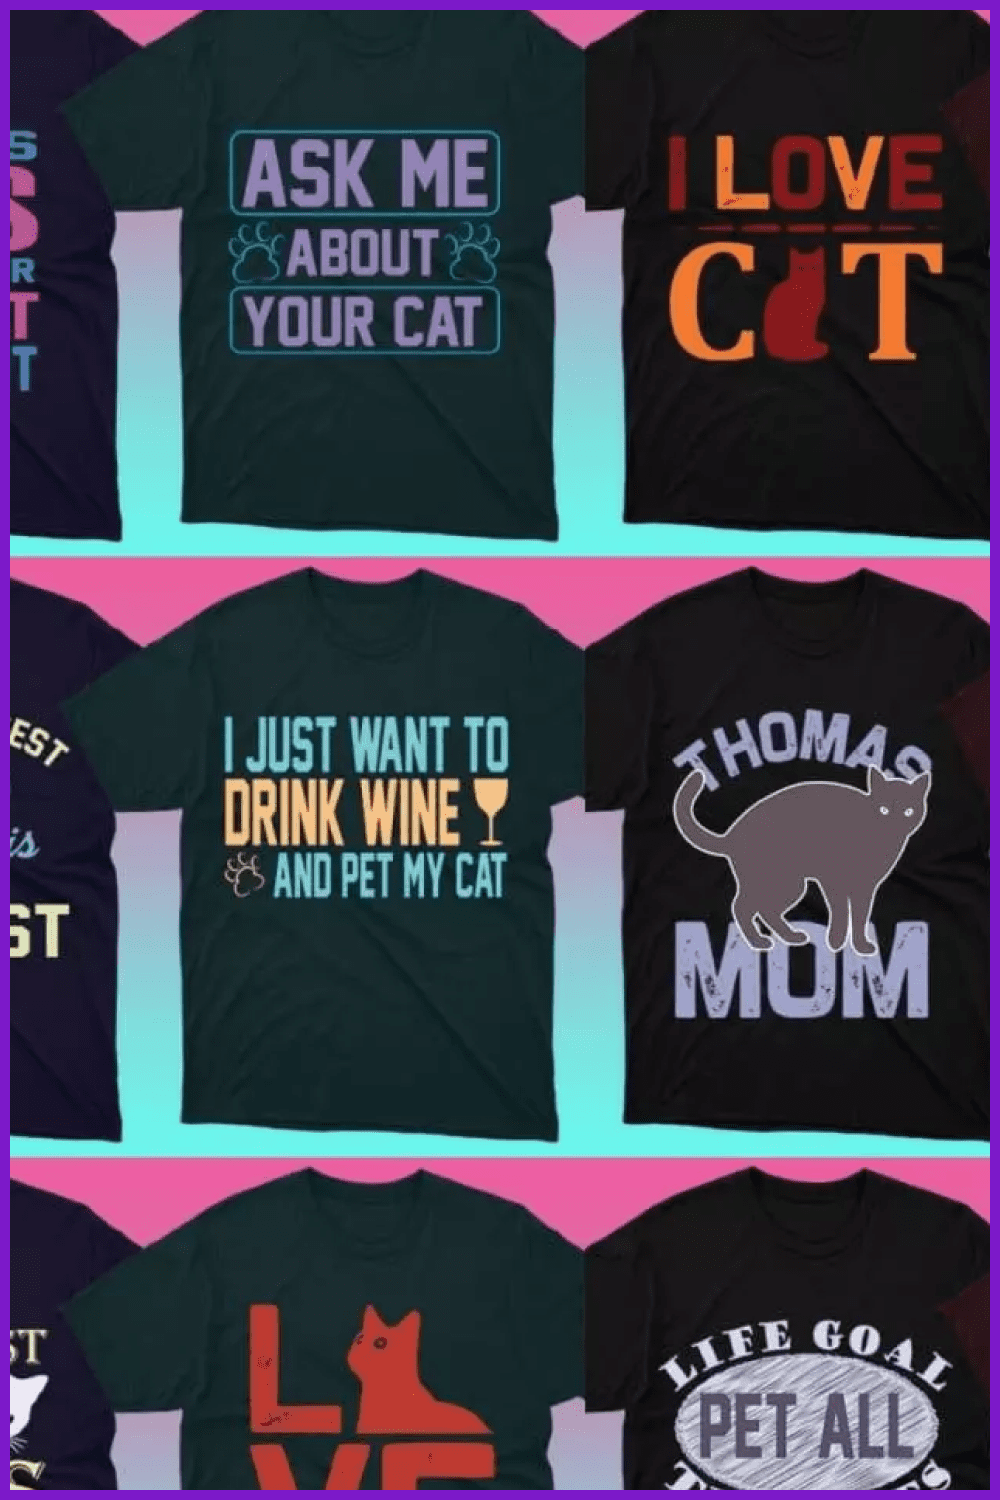 Collage of images of dark t-shirts with inscriptions about cats.